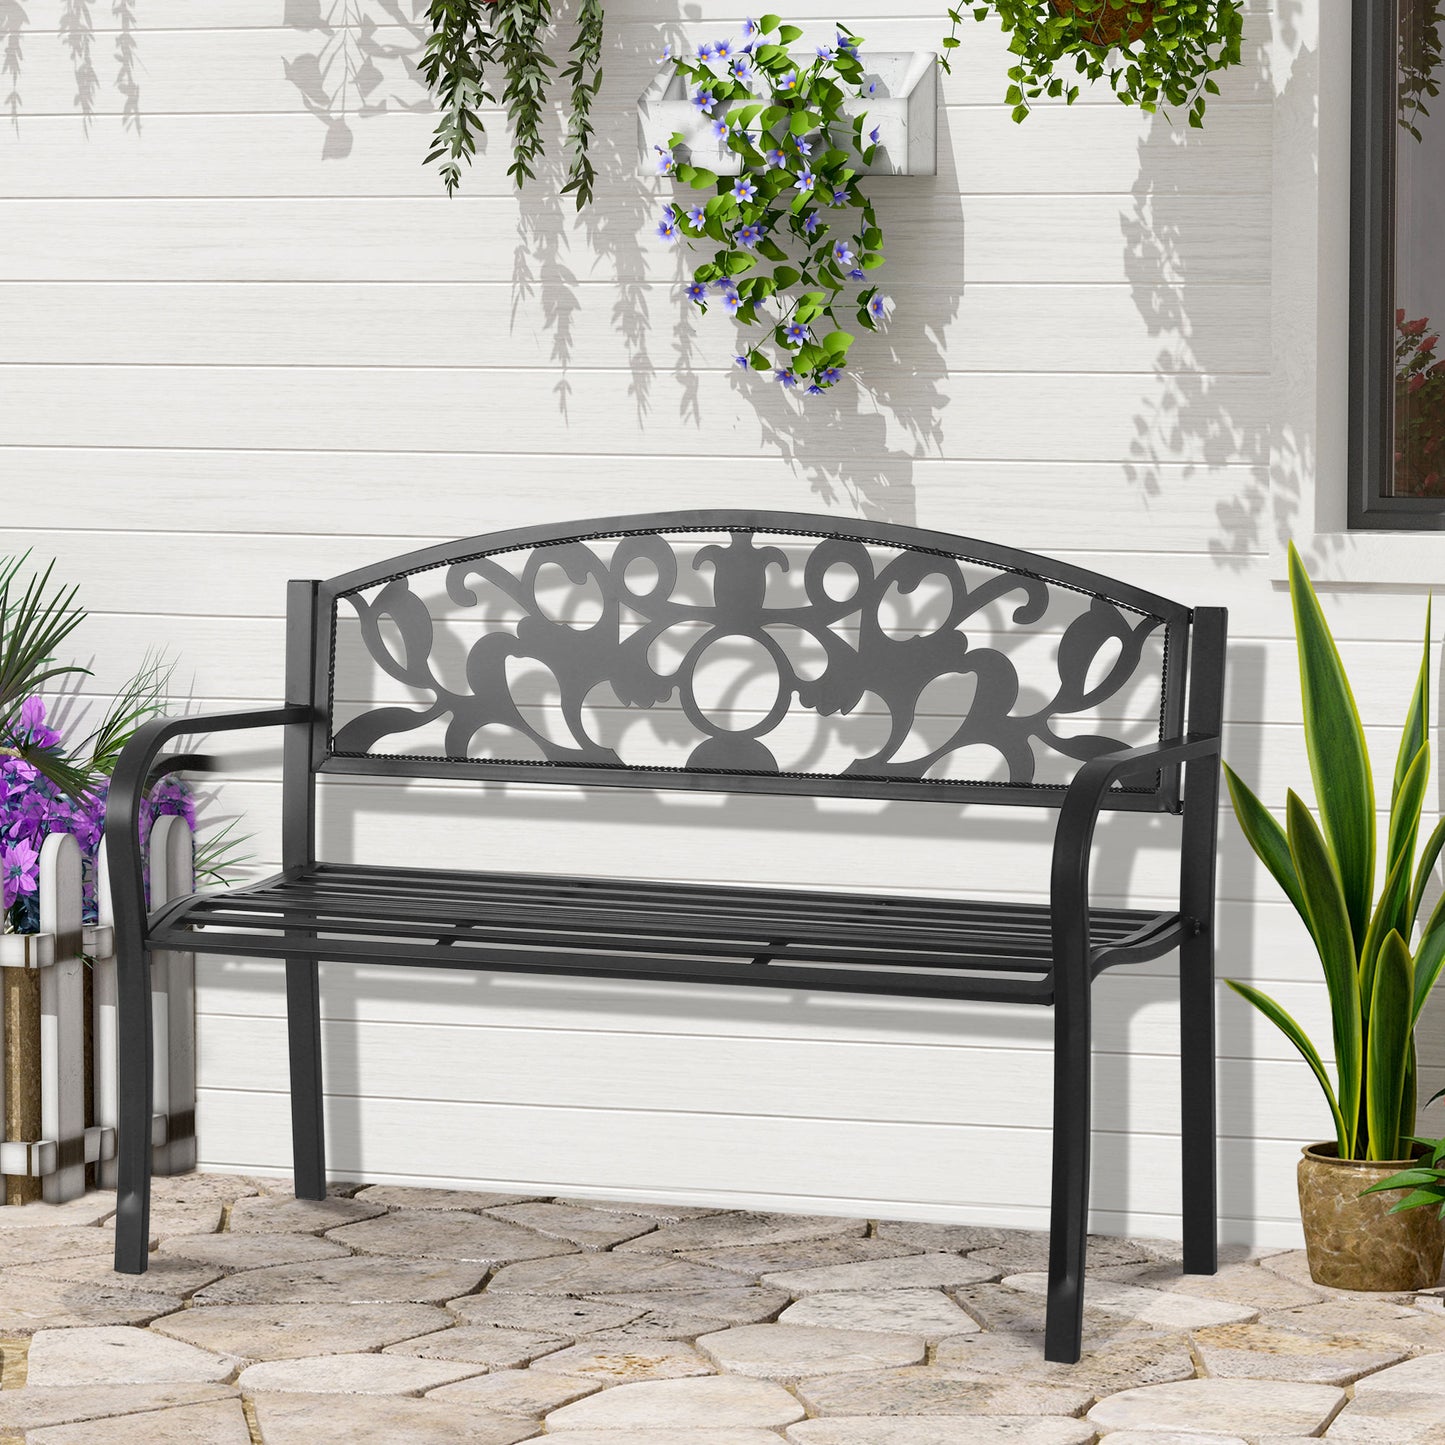 Outsunny 2 Seater Outdoor Patio Garden Metal Bench Park Yard Furniture Porch Chair Seat Black 128L x 91H x 50W cm